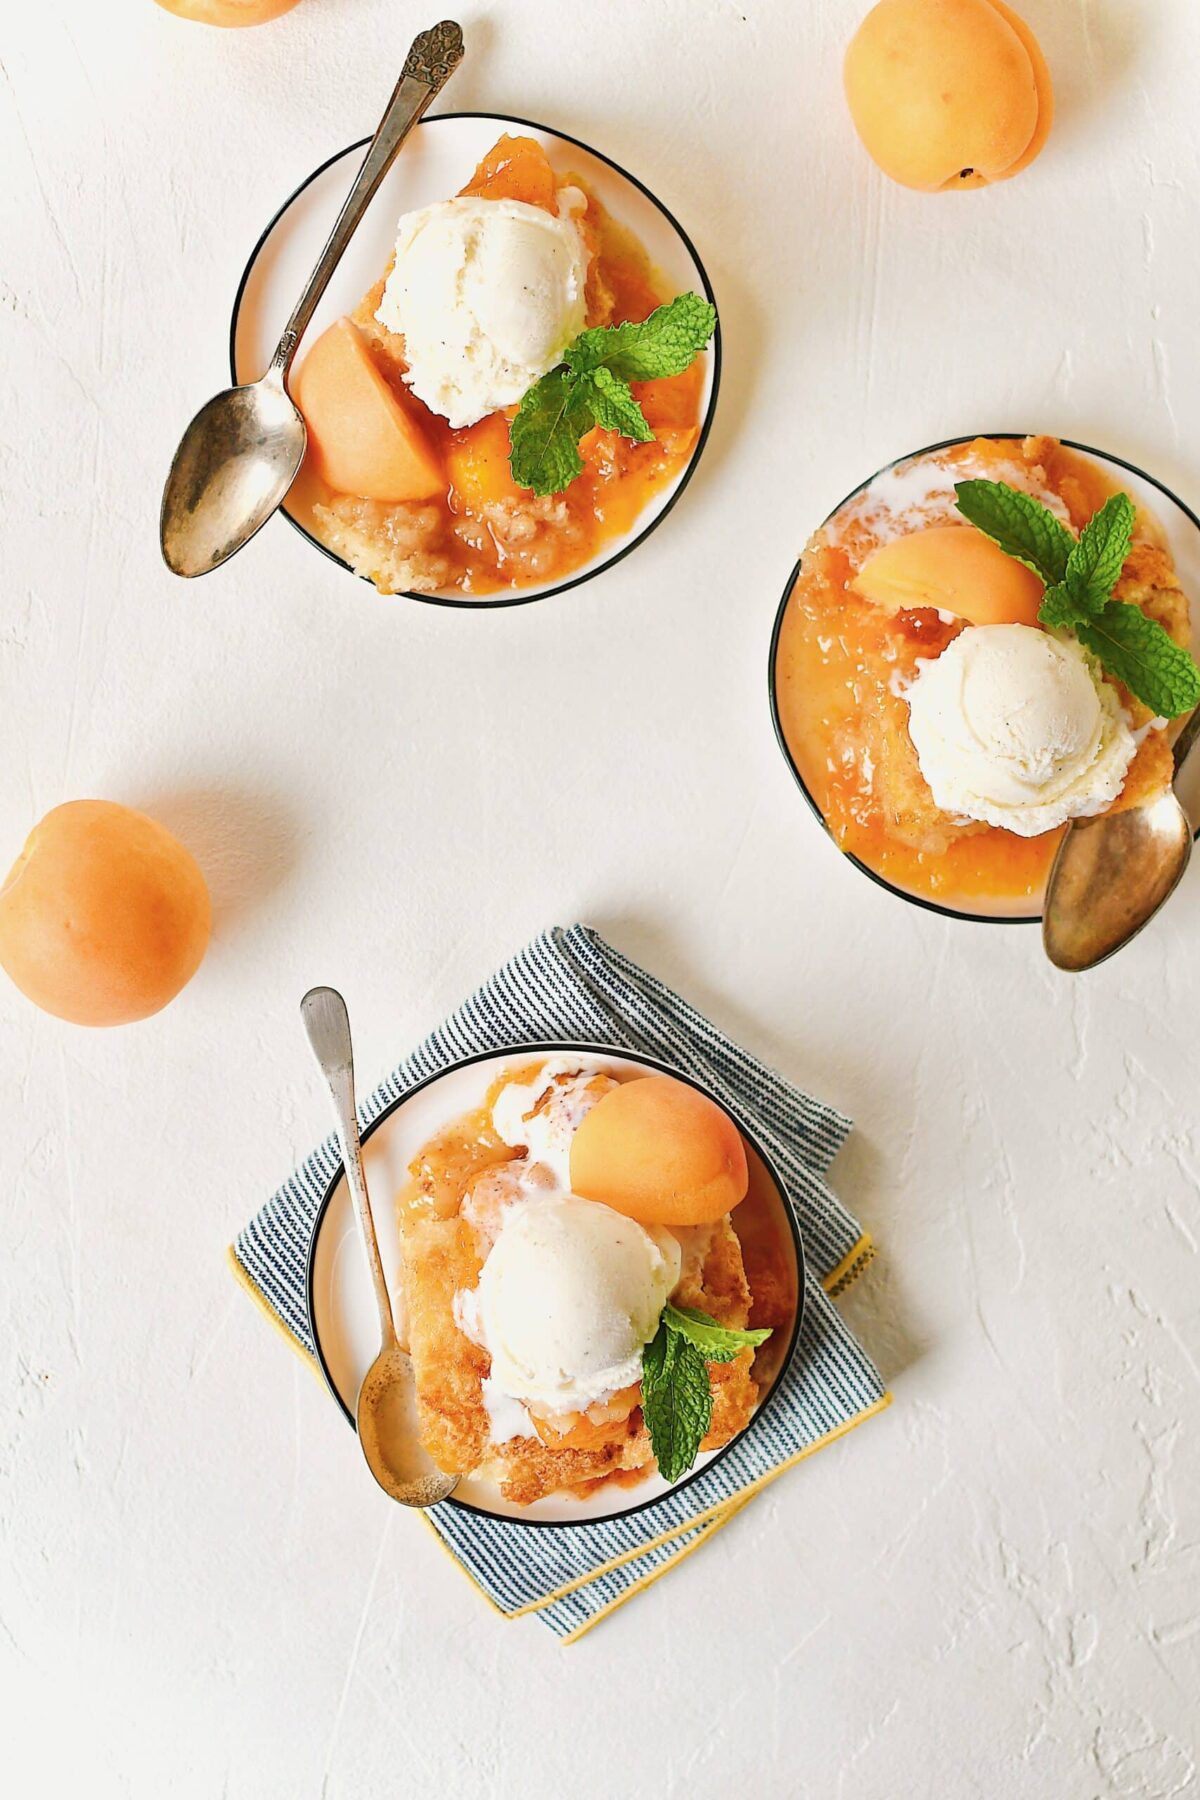 Apricot Cobbler served on small plates with a scoop of vanilla ice cream on top, a slice of fresh apricot, a sprig of mint, and a spoon to eat it with.